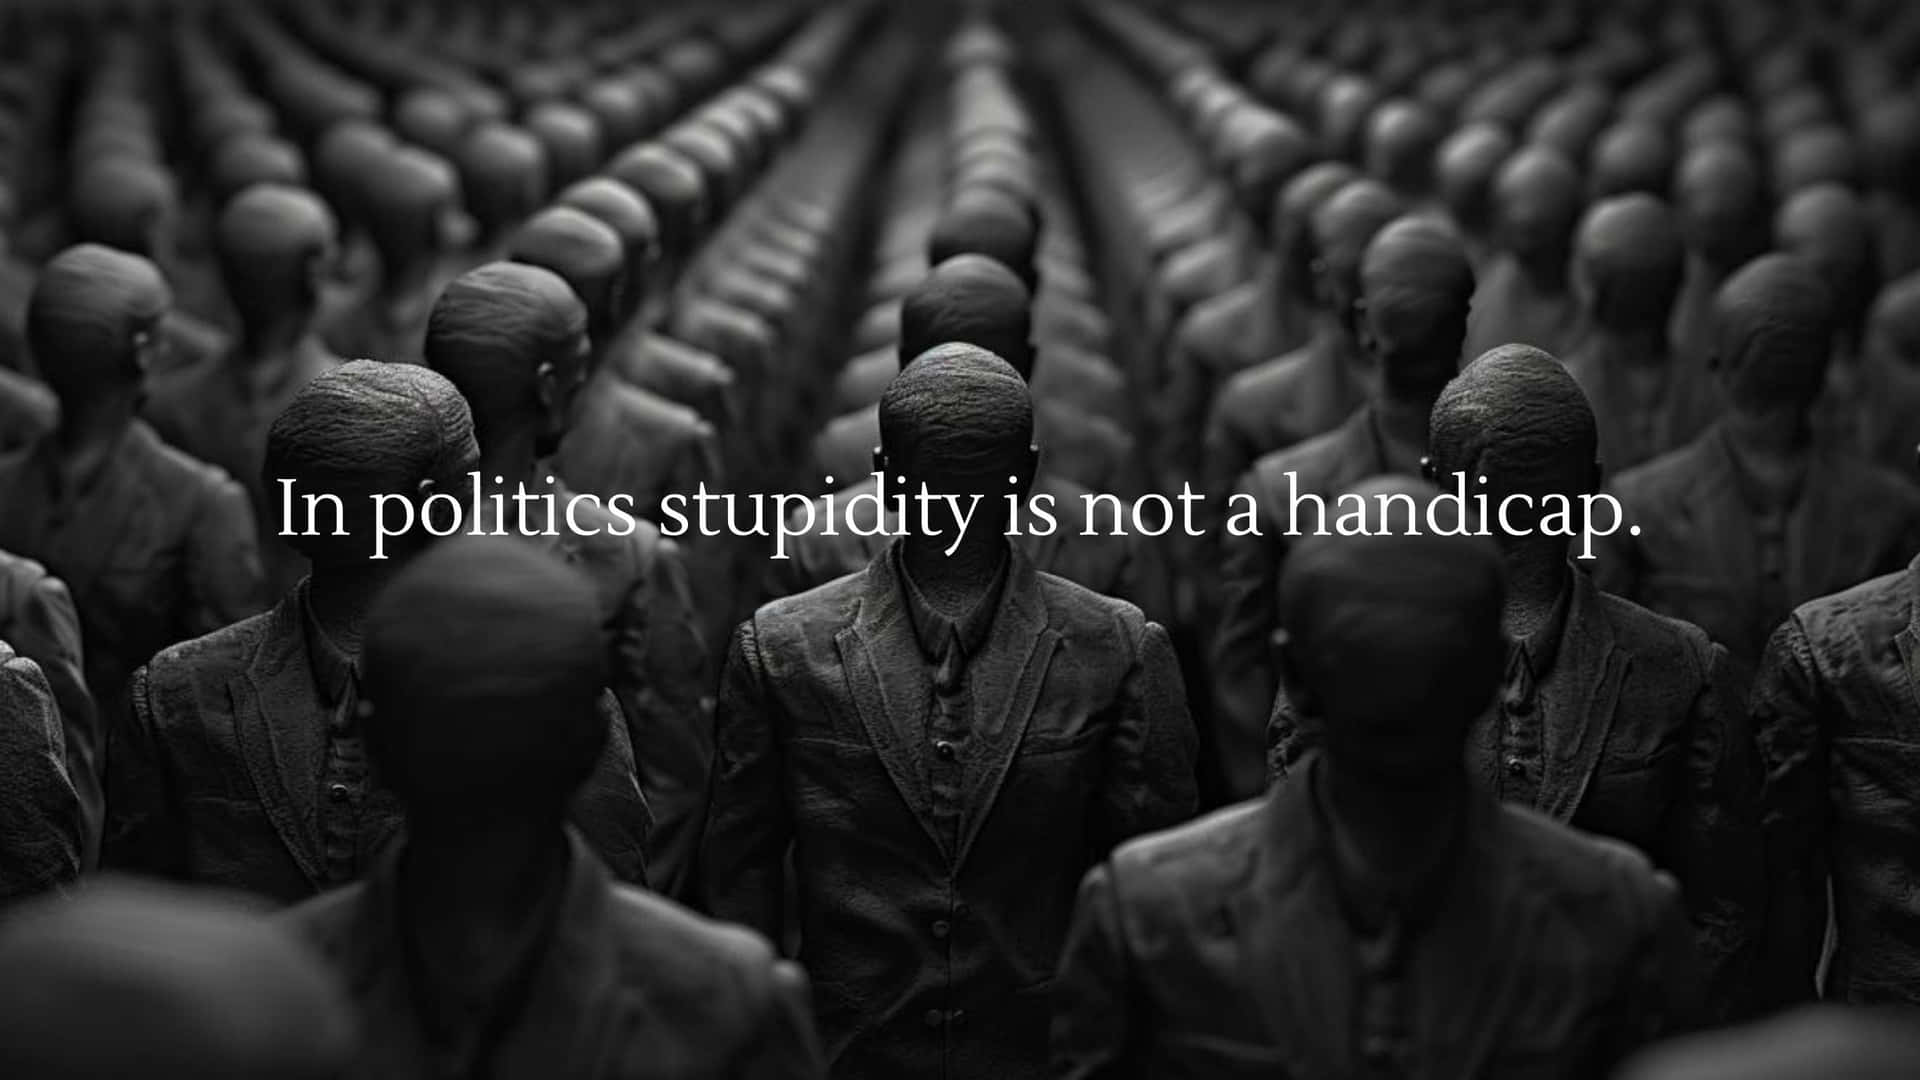 Political Stupidity Quote Army Wallpaper